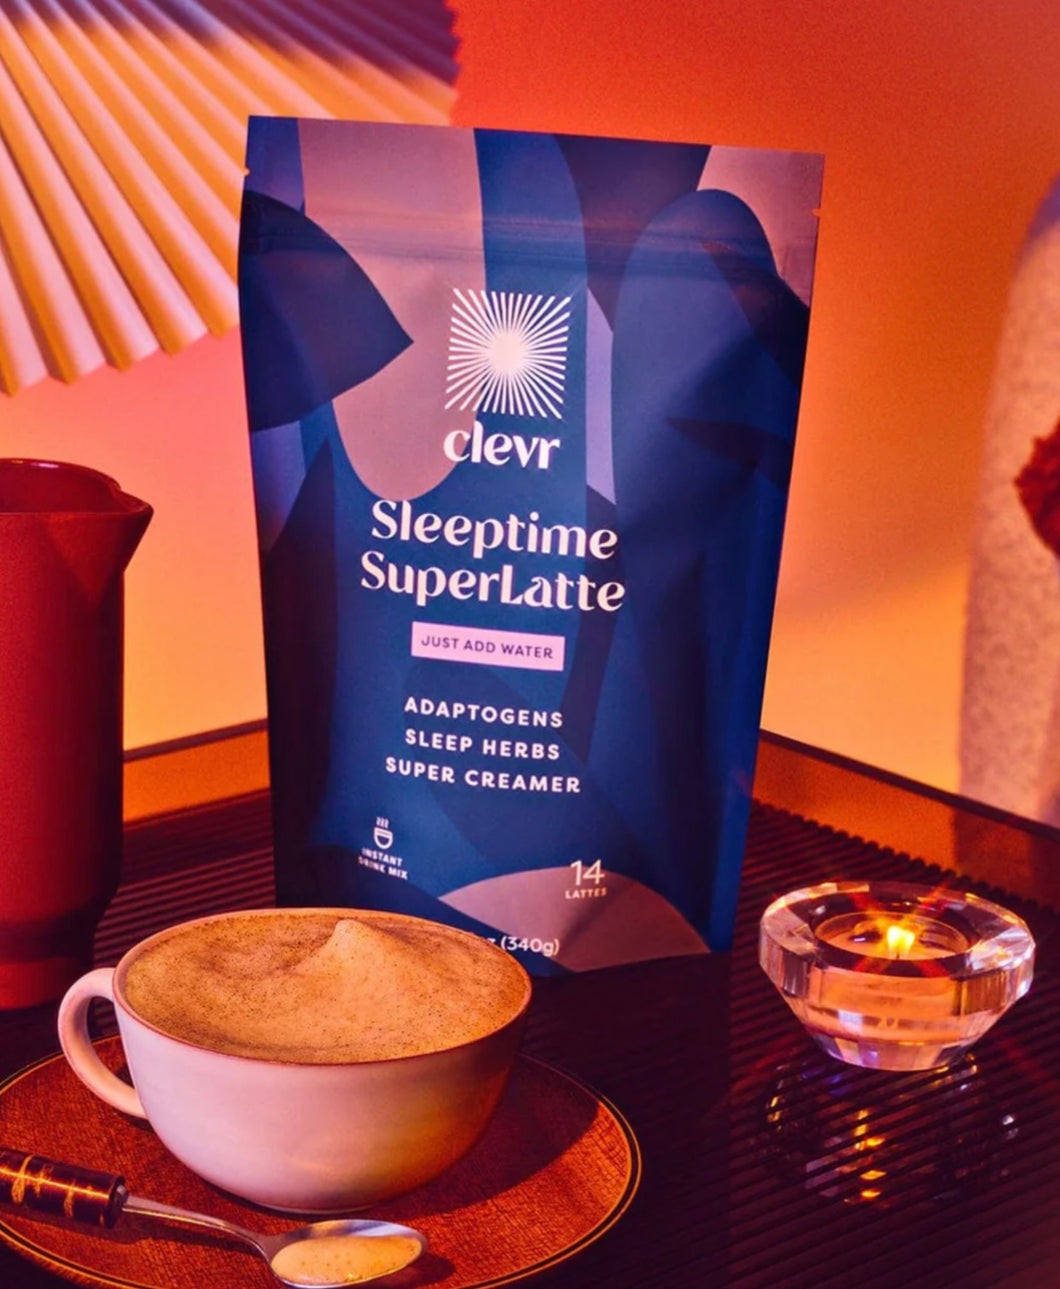 Clevr Sleeptime Super Latte with Reishi